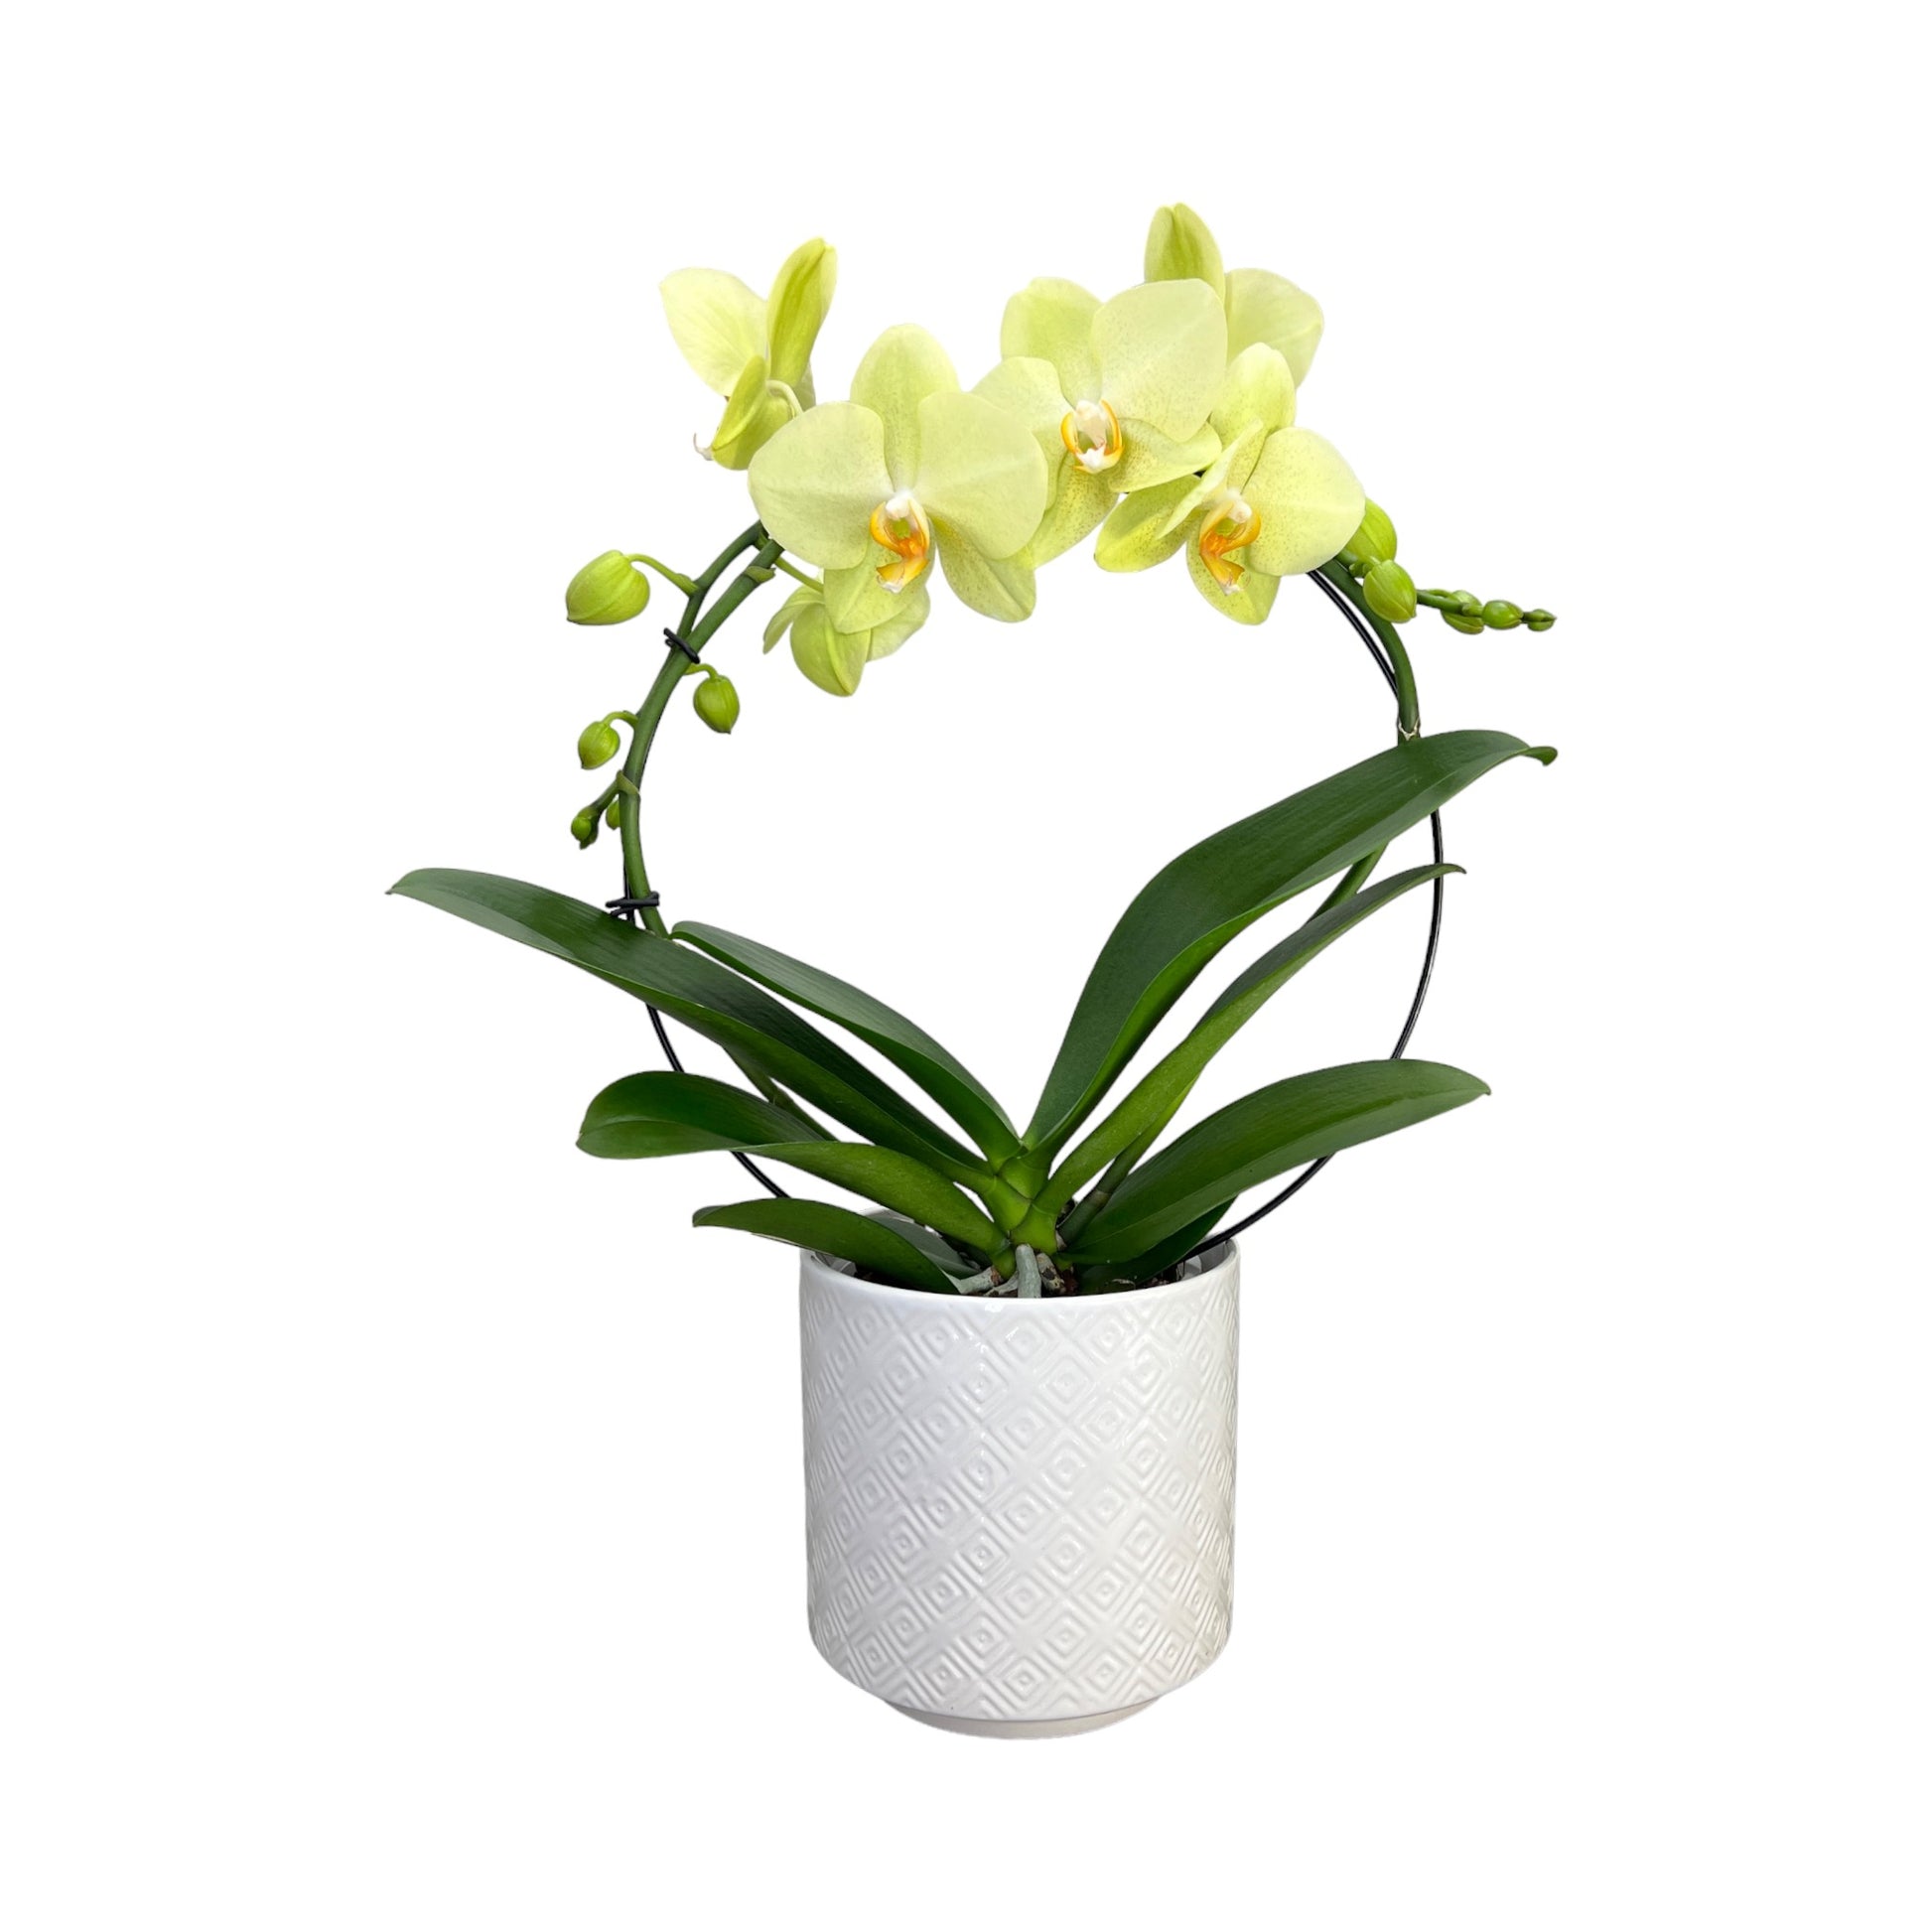 Hooped Orchid 12 cm in Ceramic Mixed Colour - Orchid The Horti House